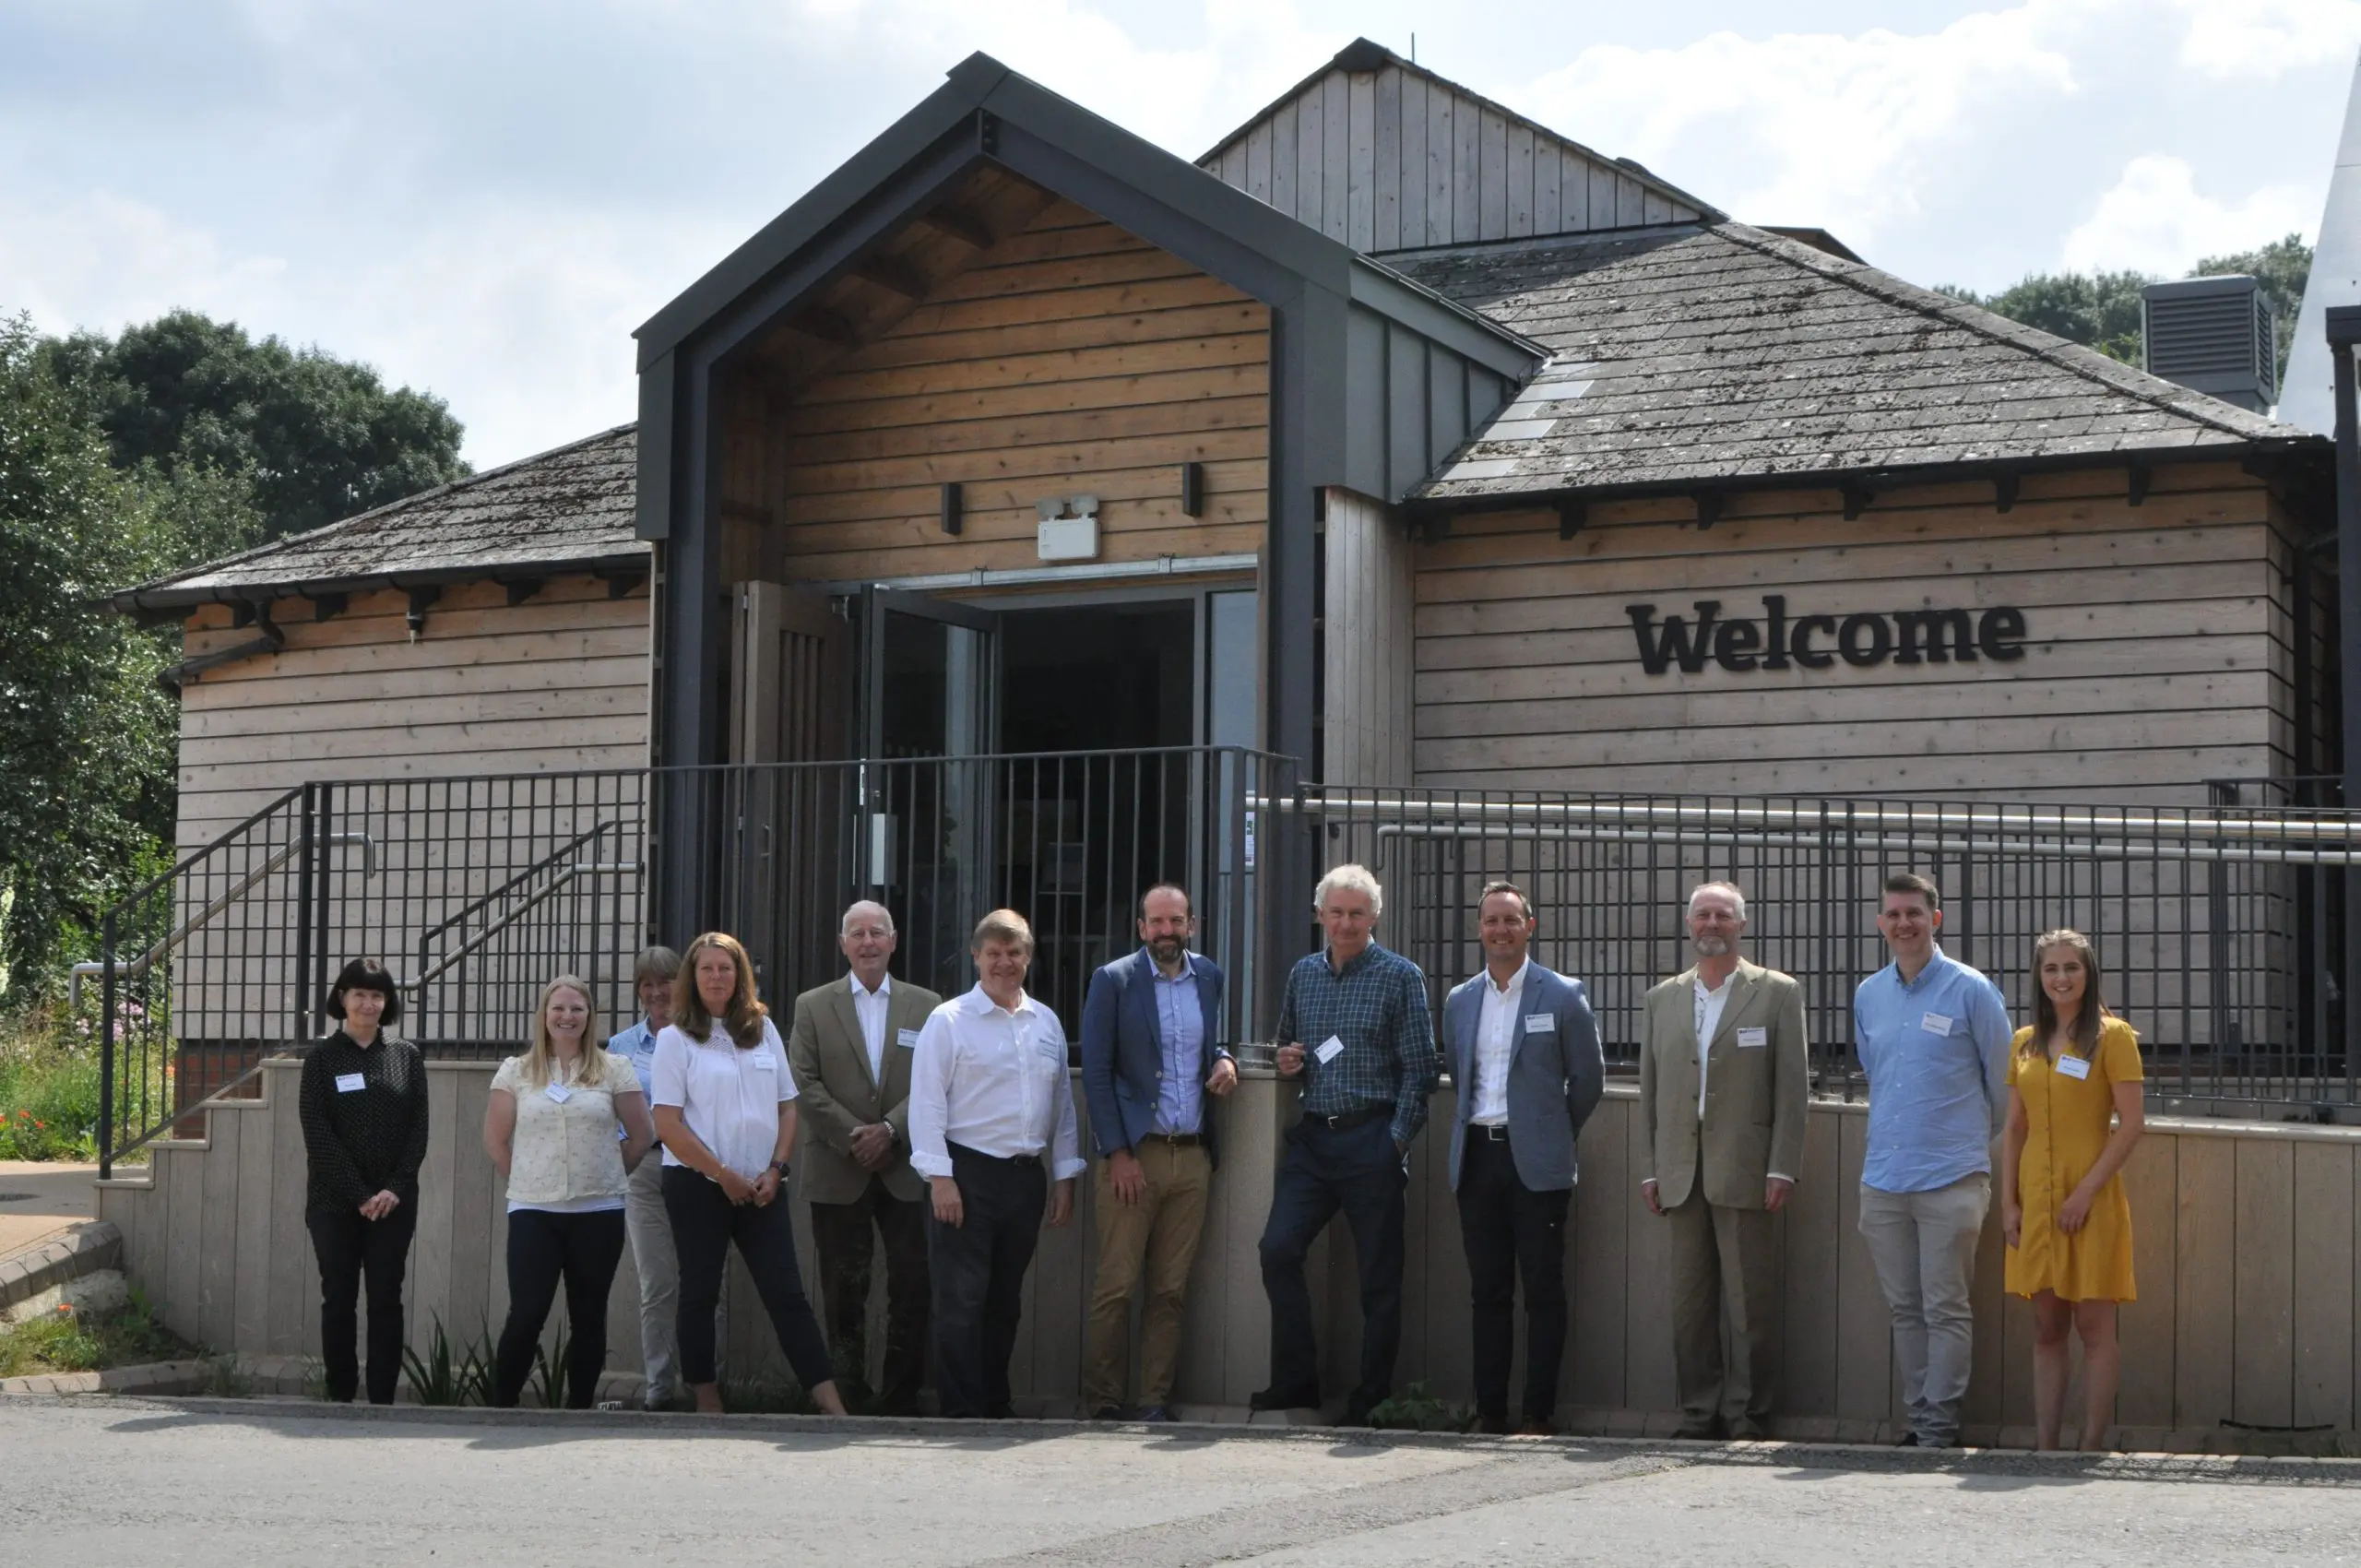 To mark the significant landmark, members of the Grundon team visited the brand new GWT headquarters at Robinswood Hill, Gloucester.